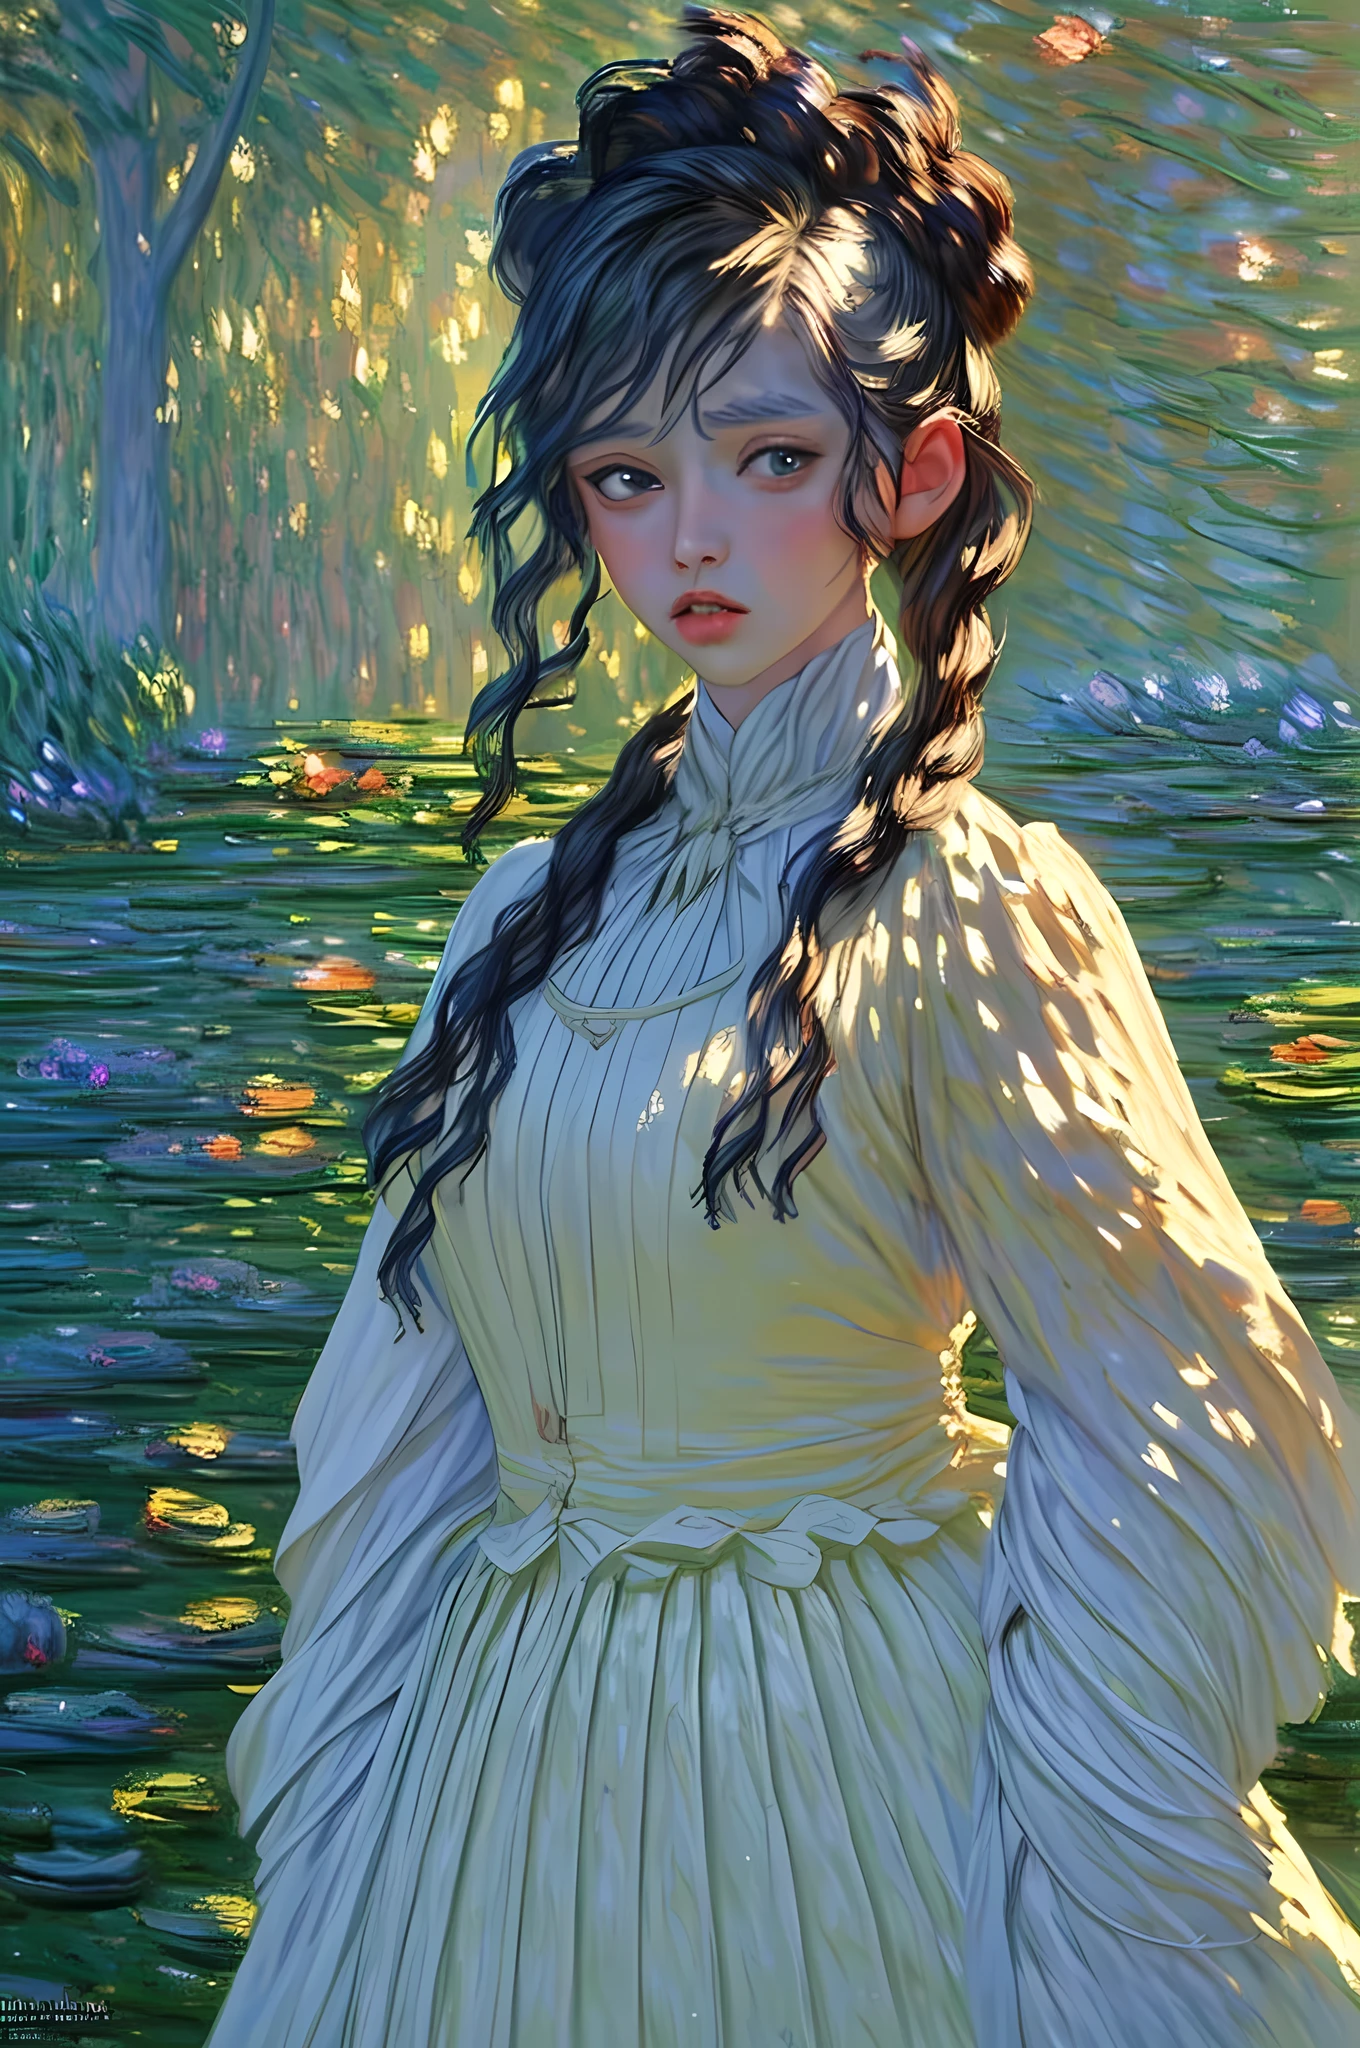 (Claude Monet Style:1.5) Claude_Monet style painting, a picture of woman paladin of nature protecting the forest, a woman knight, black hair, long hair, full body (best details, Masterpiece, best quality :1.5), ultra detailed face (best details, Masterpiece, best quality :1.5), ultra feminine (best details, Masterpiece, best quality :1.5), black hair, long hair, braided hair, pale skin, (deep blue: 1.2) eyes, intense eyes, wearying heavy armor, white armor (best details, Masterpiece, best quality :1.5), green cloak, armed with a sword, glowing sword GlowingRunes_green, fantasy forest background, D&D art, RPG art, magical atmosphere magic-fantasy-forest, ultra best realistic, best details, best quality, 16k, [ultra detailed], masterpiece, best quality, (extremely detailed), ultra wide shot, photorealism, depth of field, hyper realistic painting, ArmoredDress